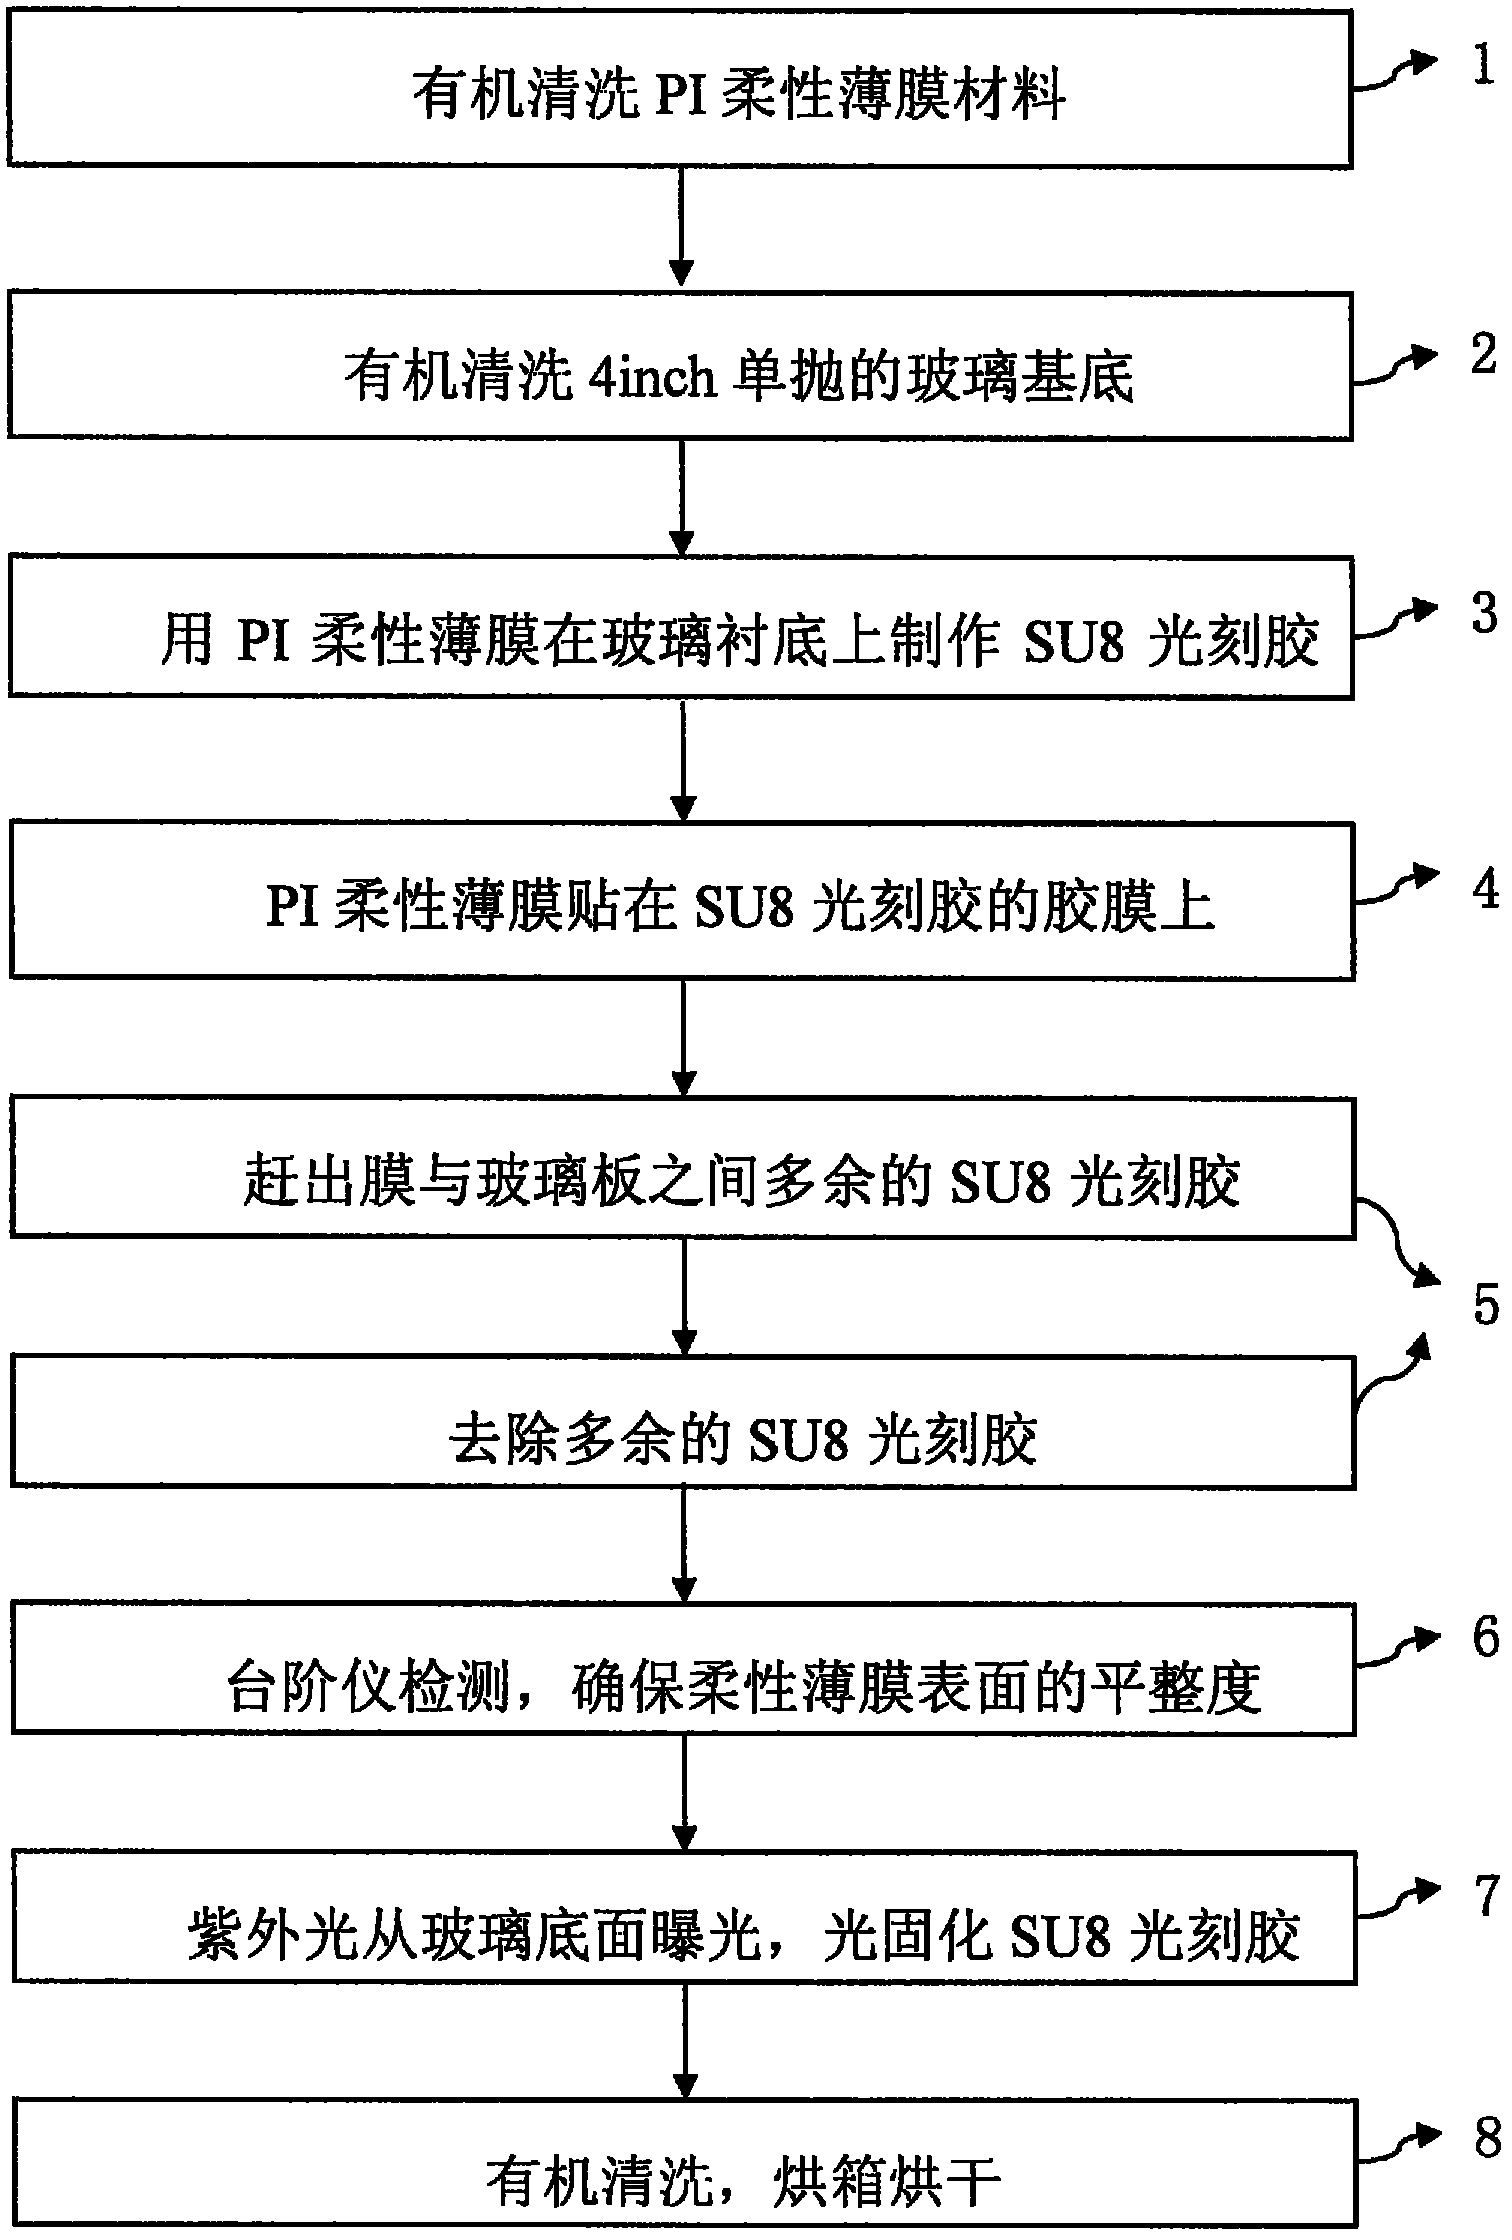 Method of adhering flexible thin-film material to glass substrate